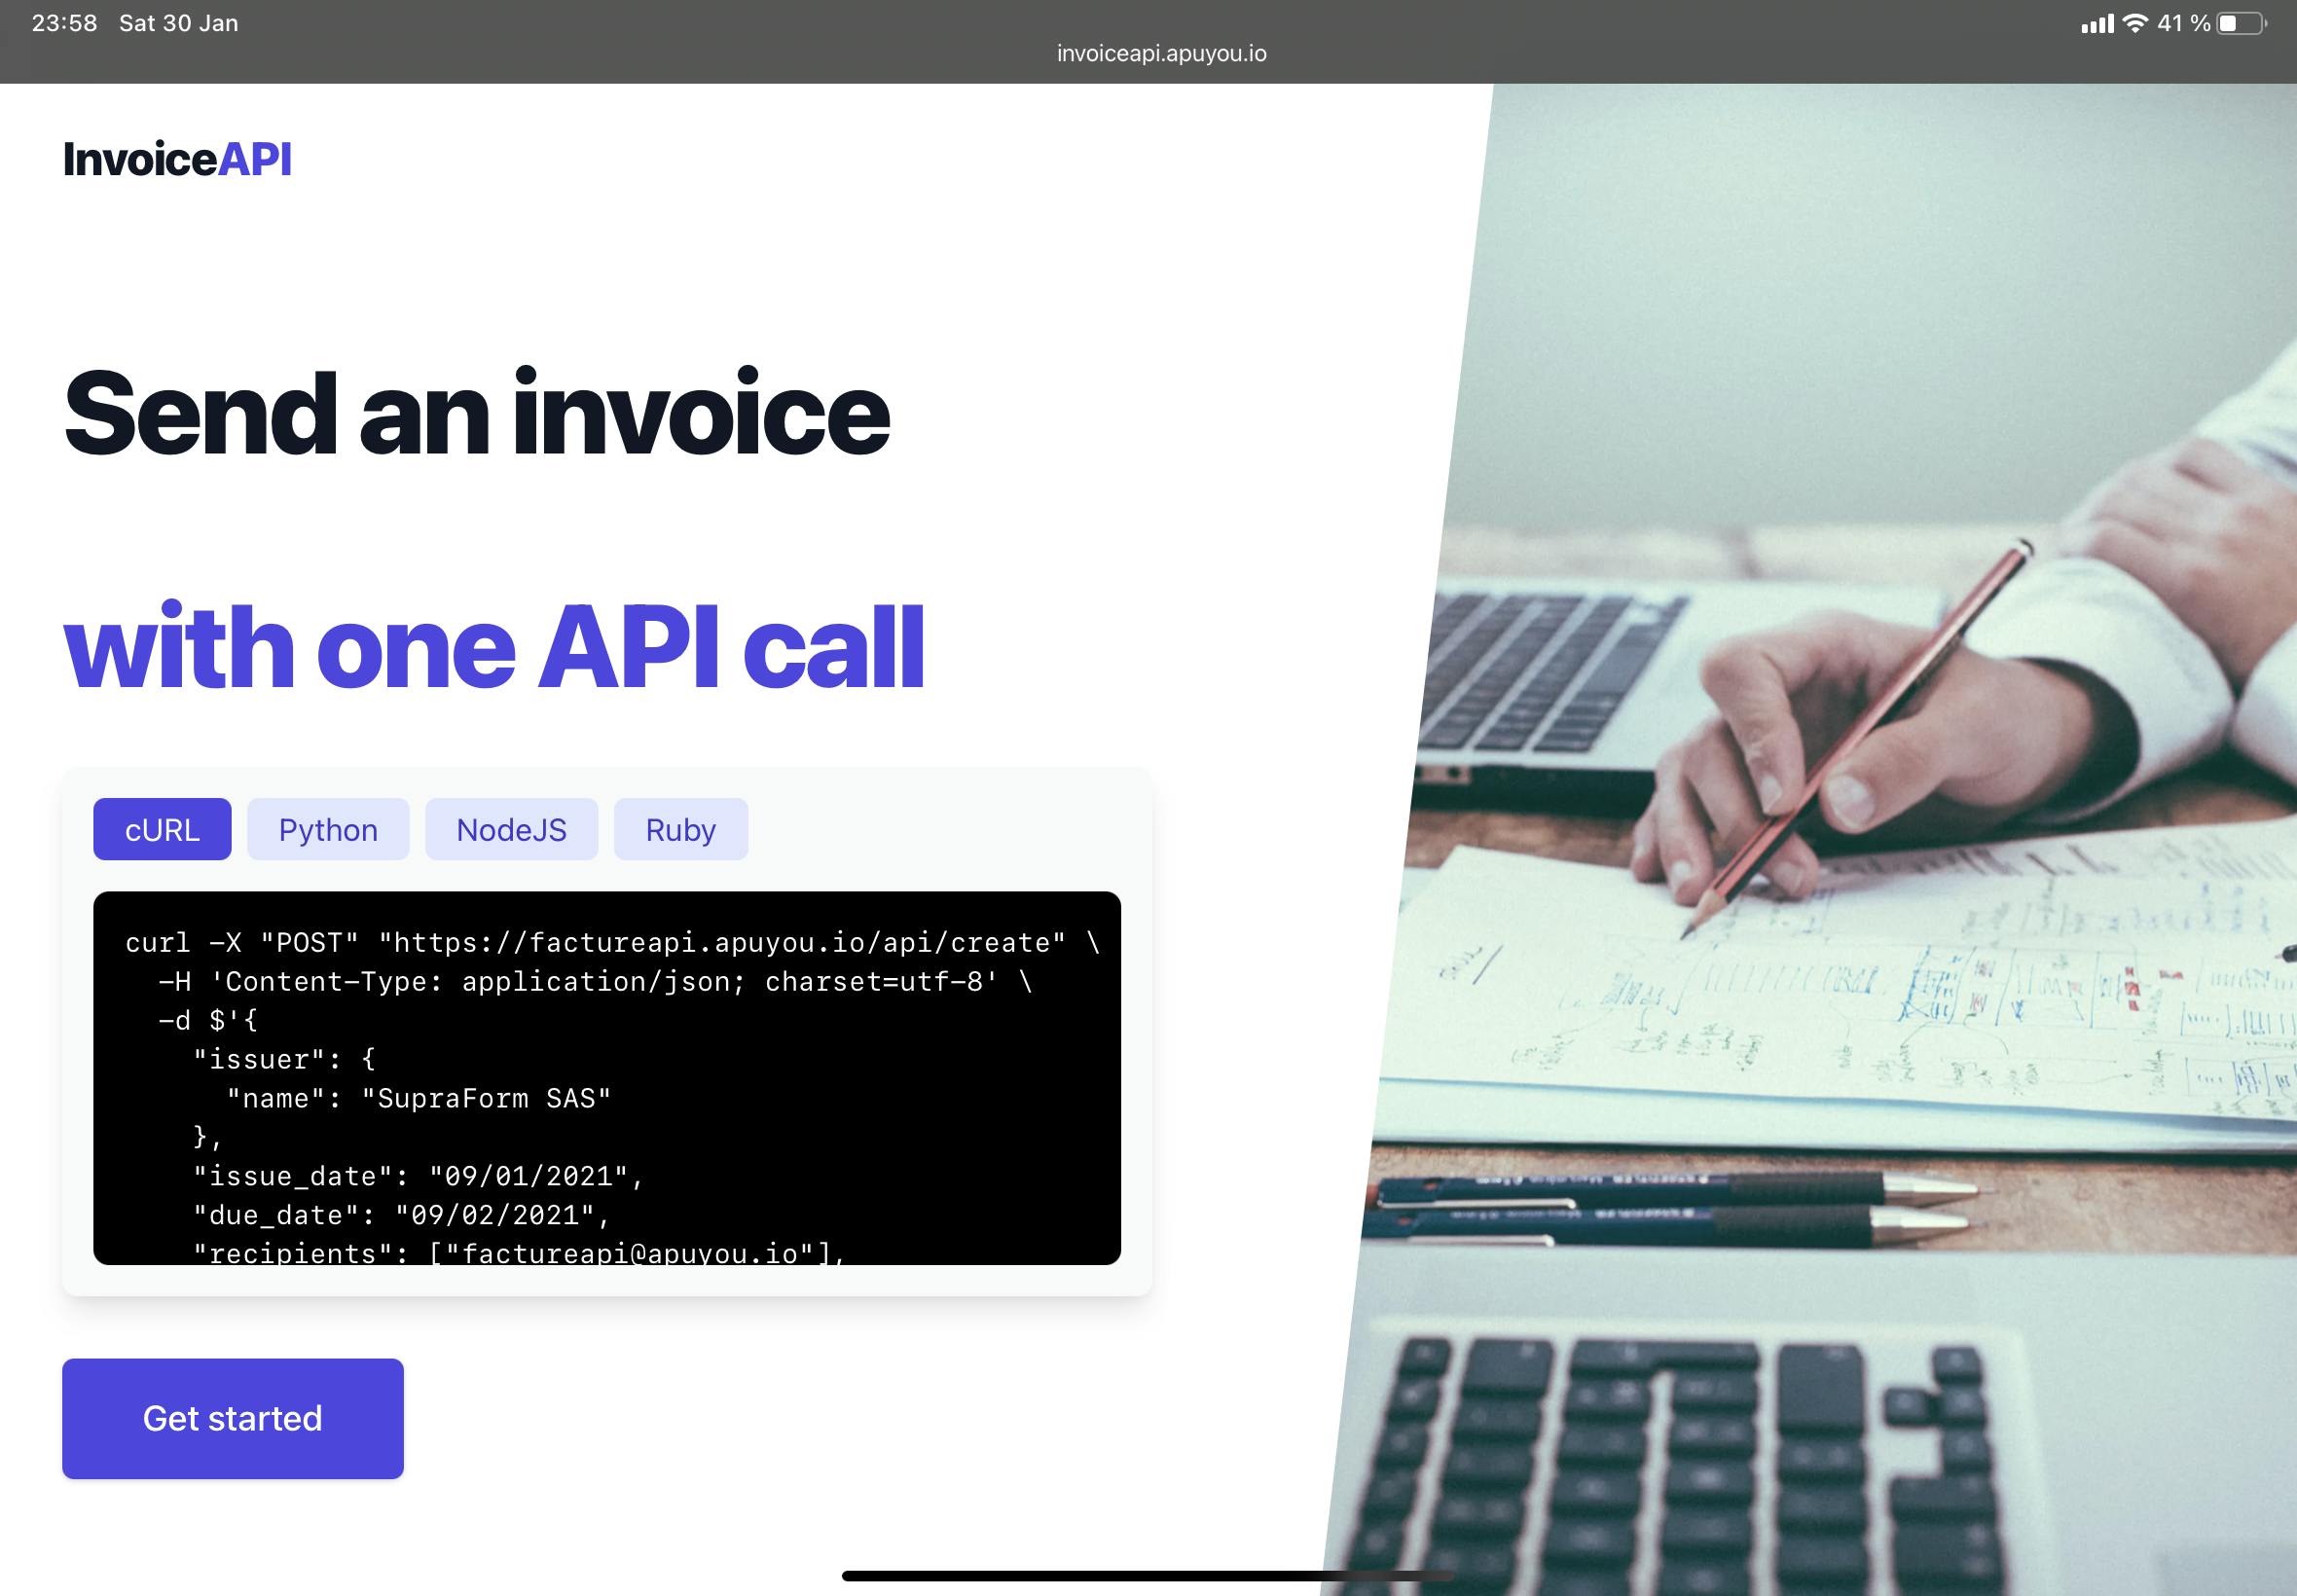 Landing Page for InvoiceAPI